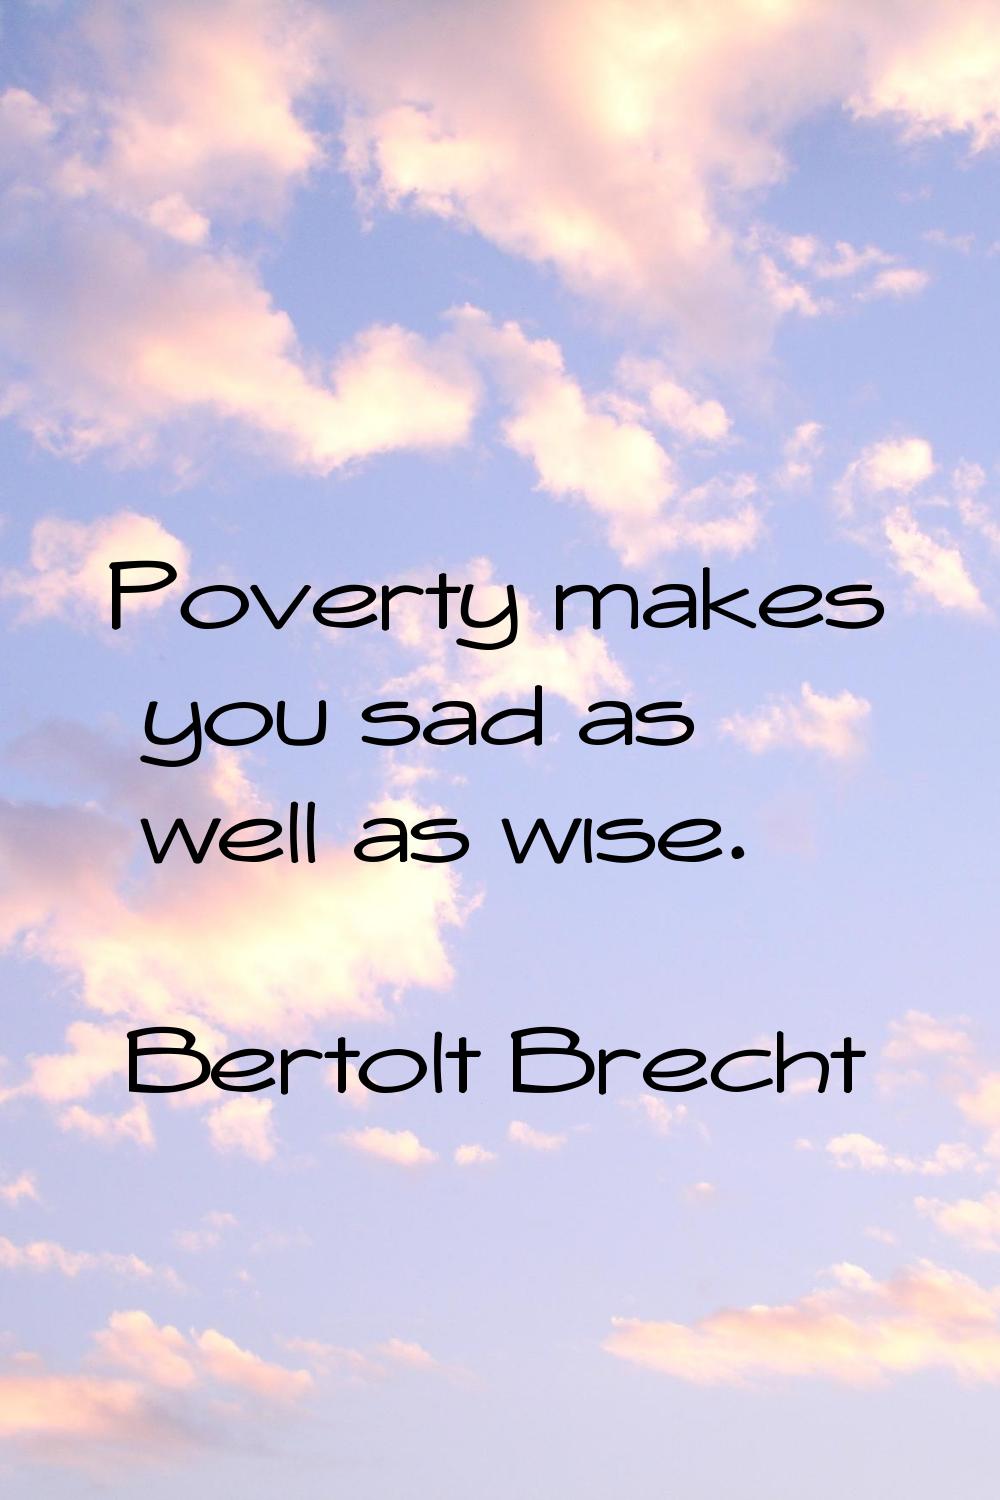 Poverty makes you sad as well as wise.